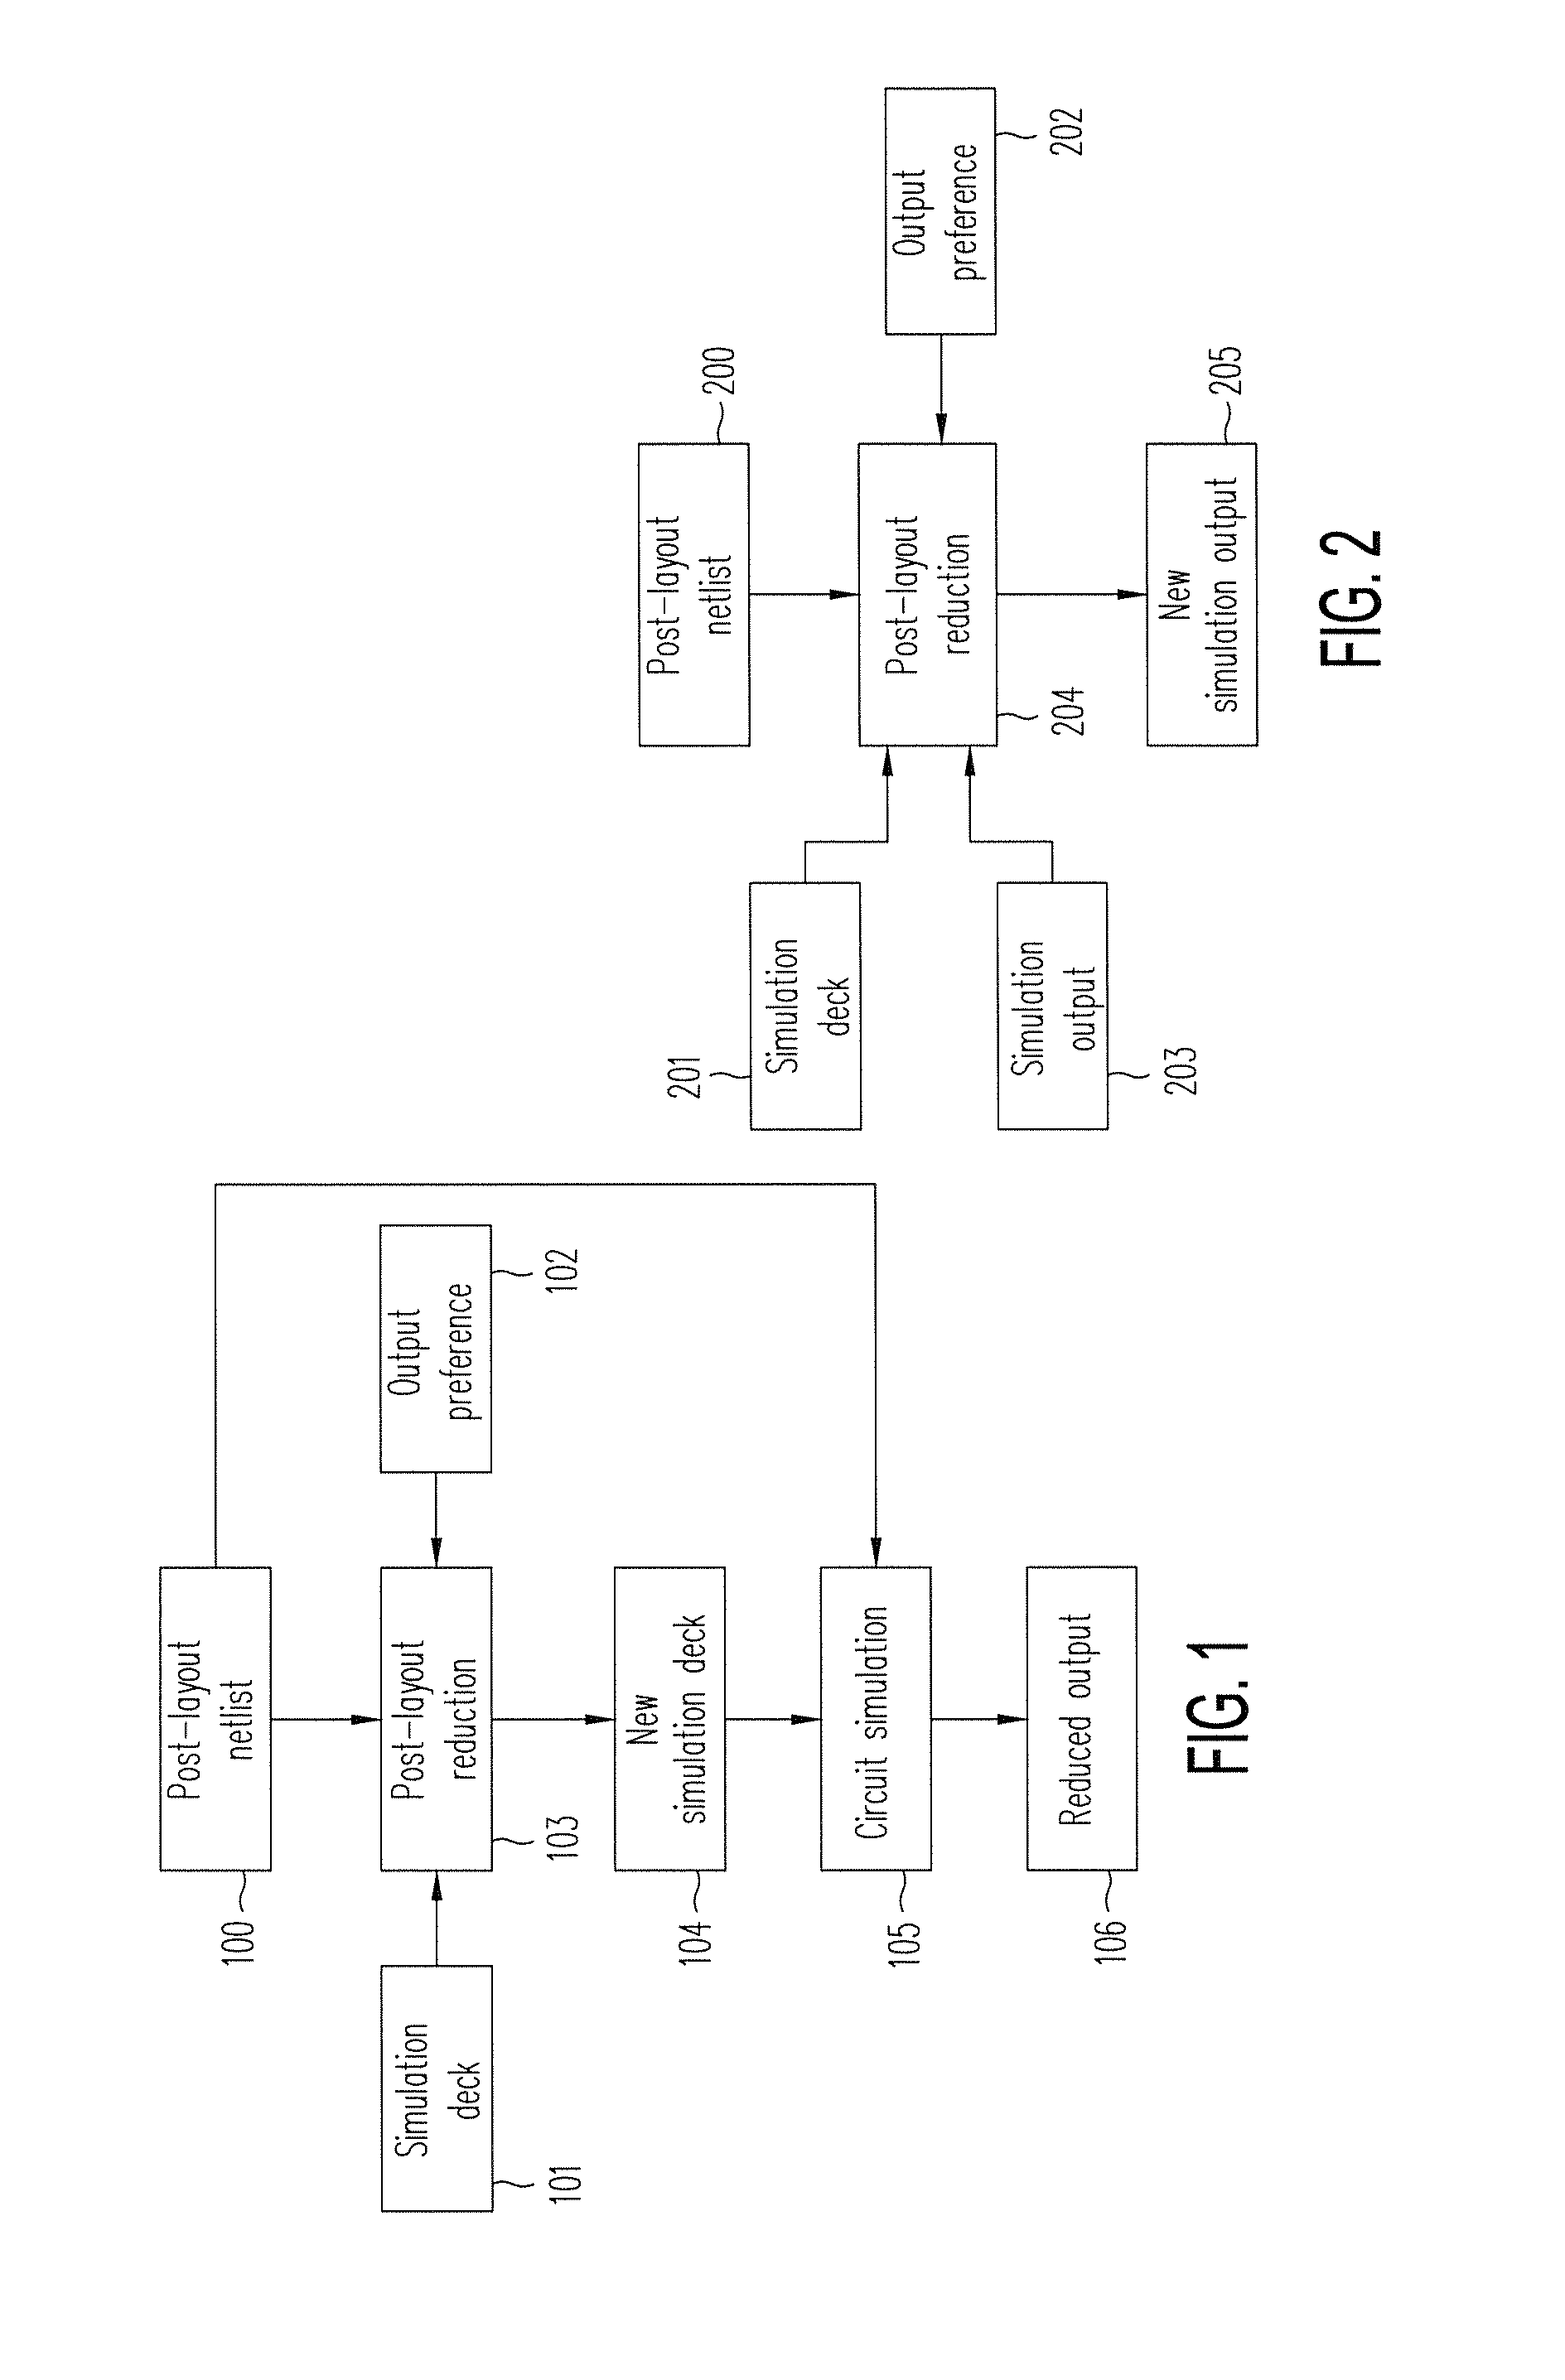 Methods for reducing post layout circuit simulation results